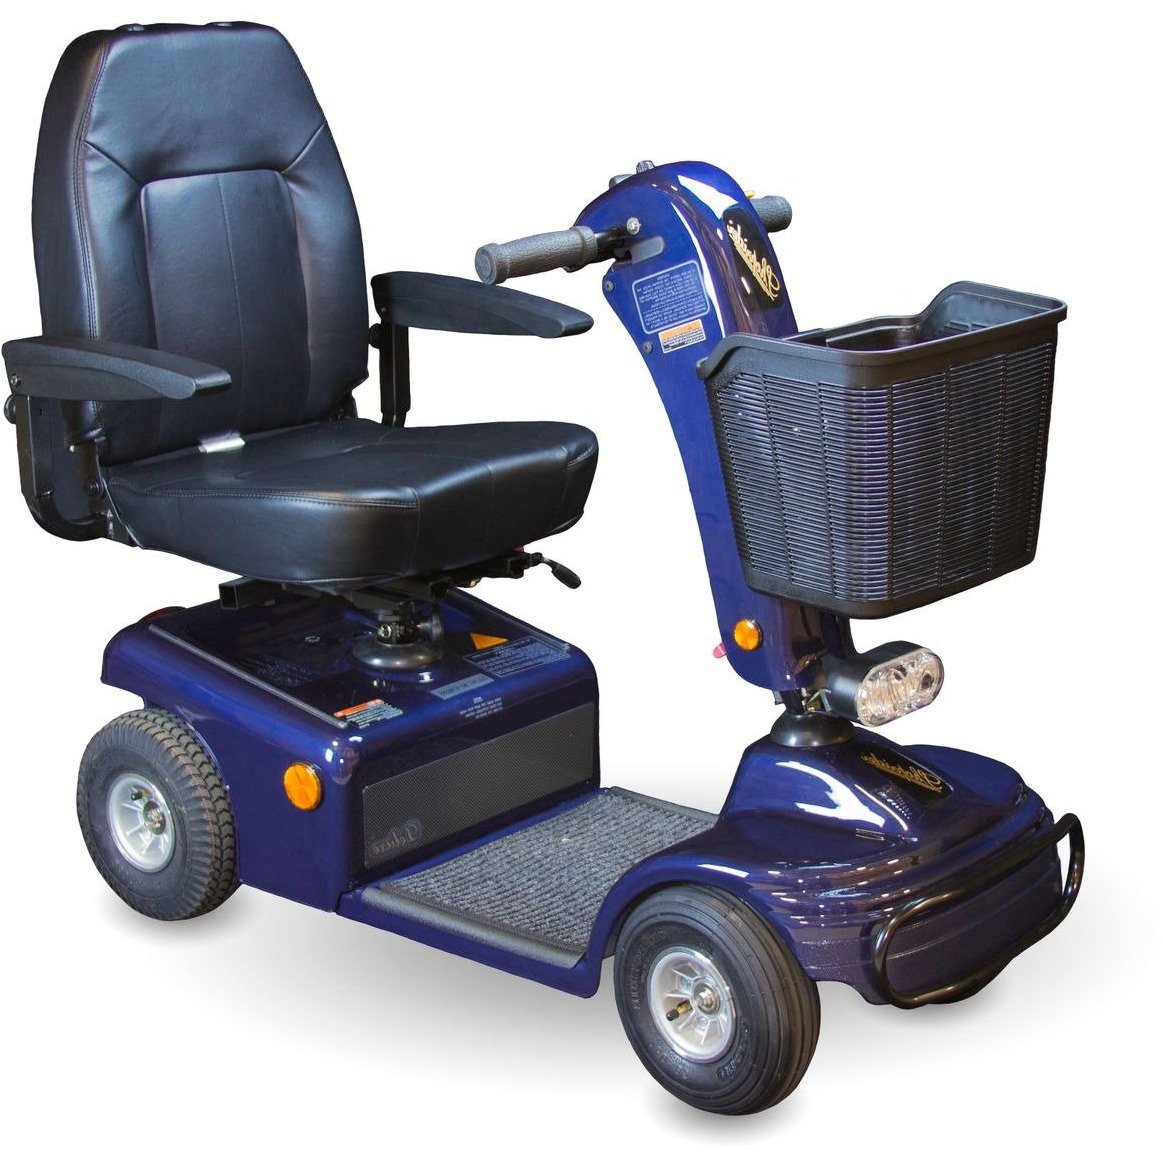 side image of the shopridder sunrunner 4 wheel mobility scooter color blue and black with a basket attached in the front- PUREUPS 